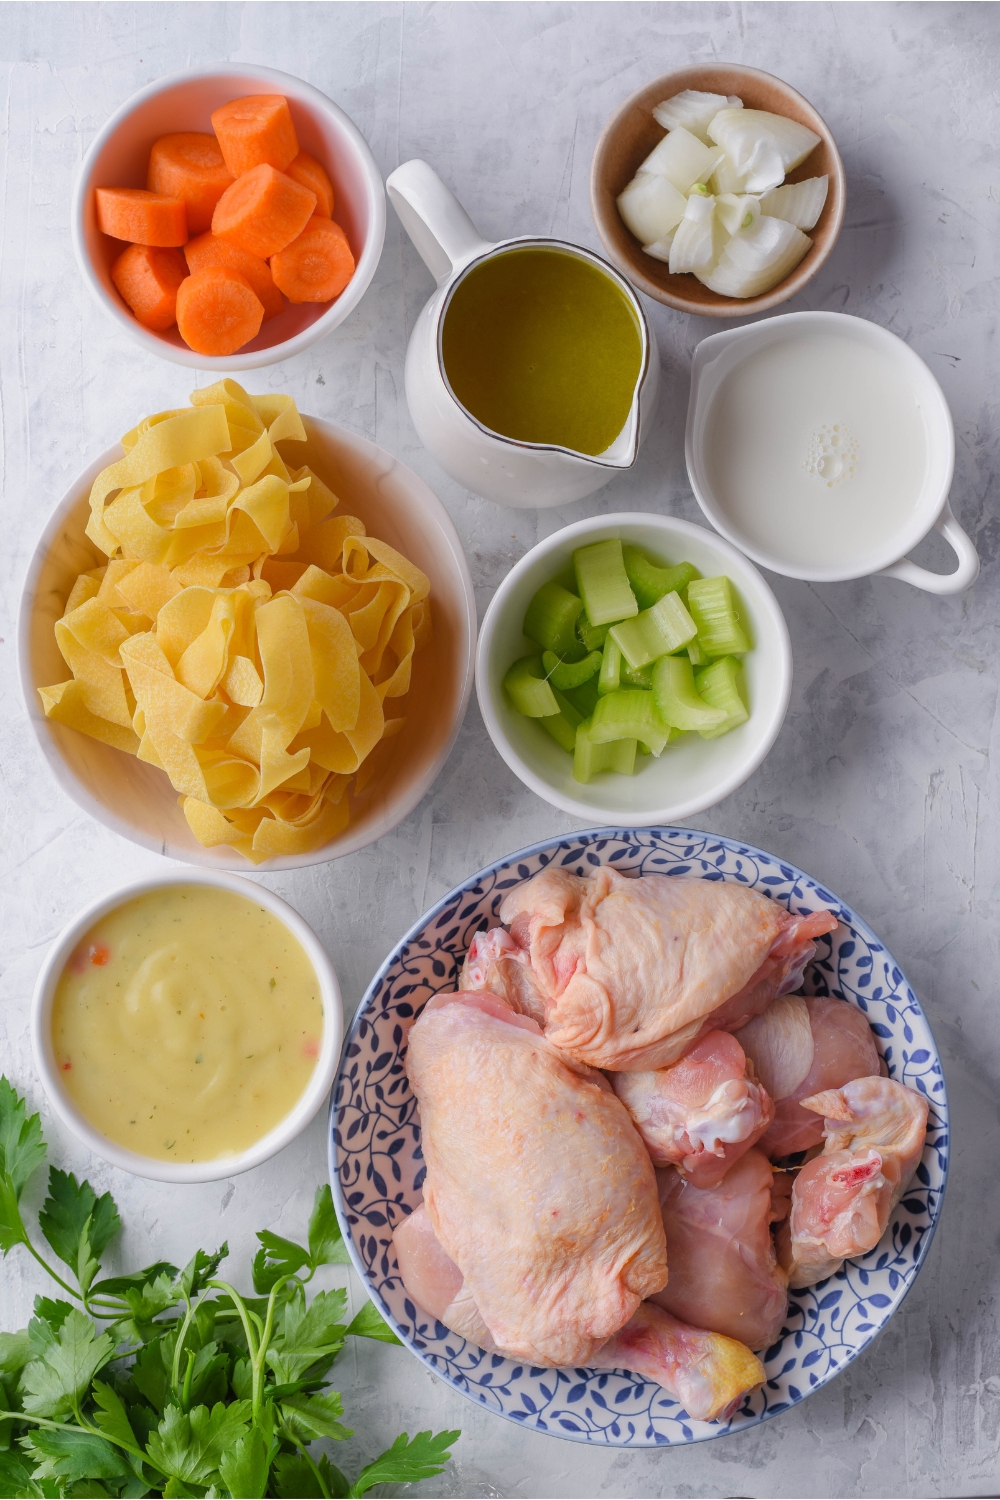 An assortment of ingredients including bowls of dried egg noodles, diced celery, carrots, onion, milk, condensed soup, and a plate of raw chicken.